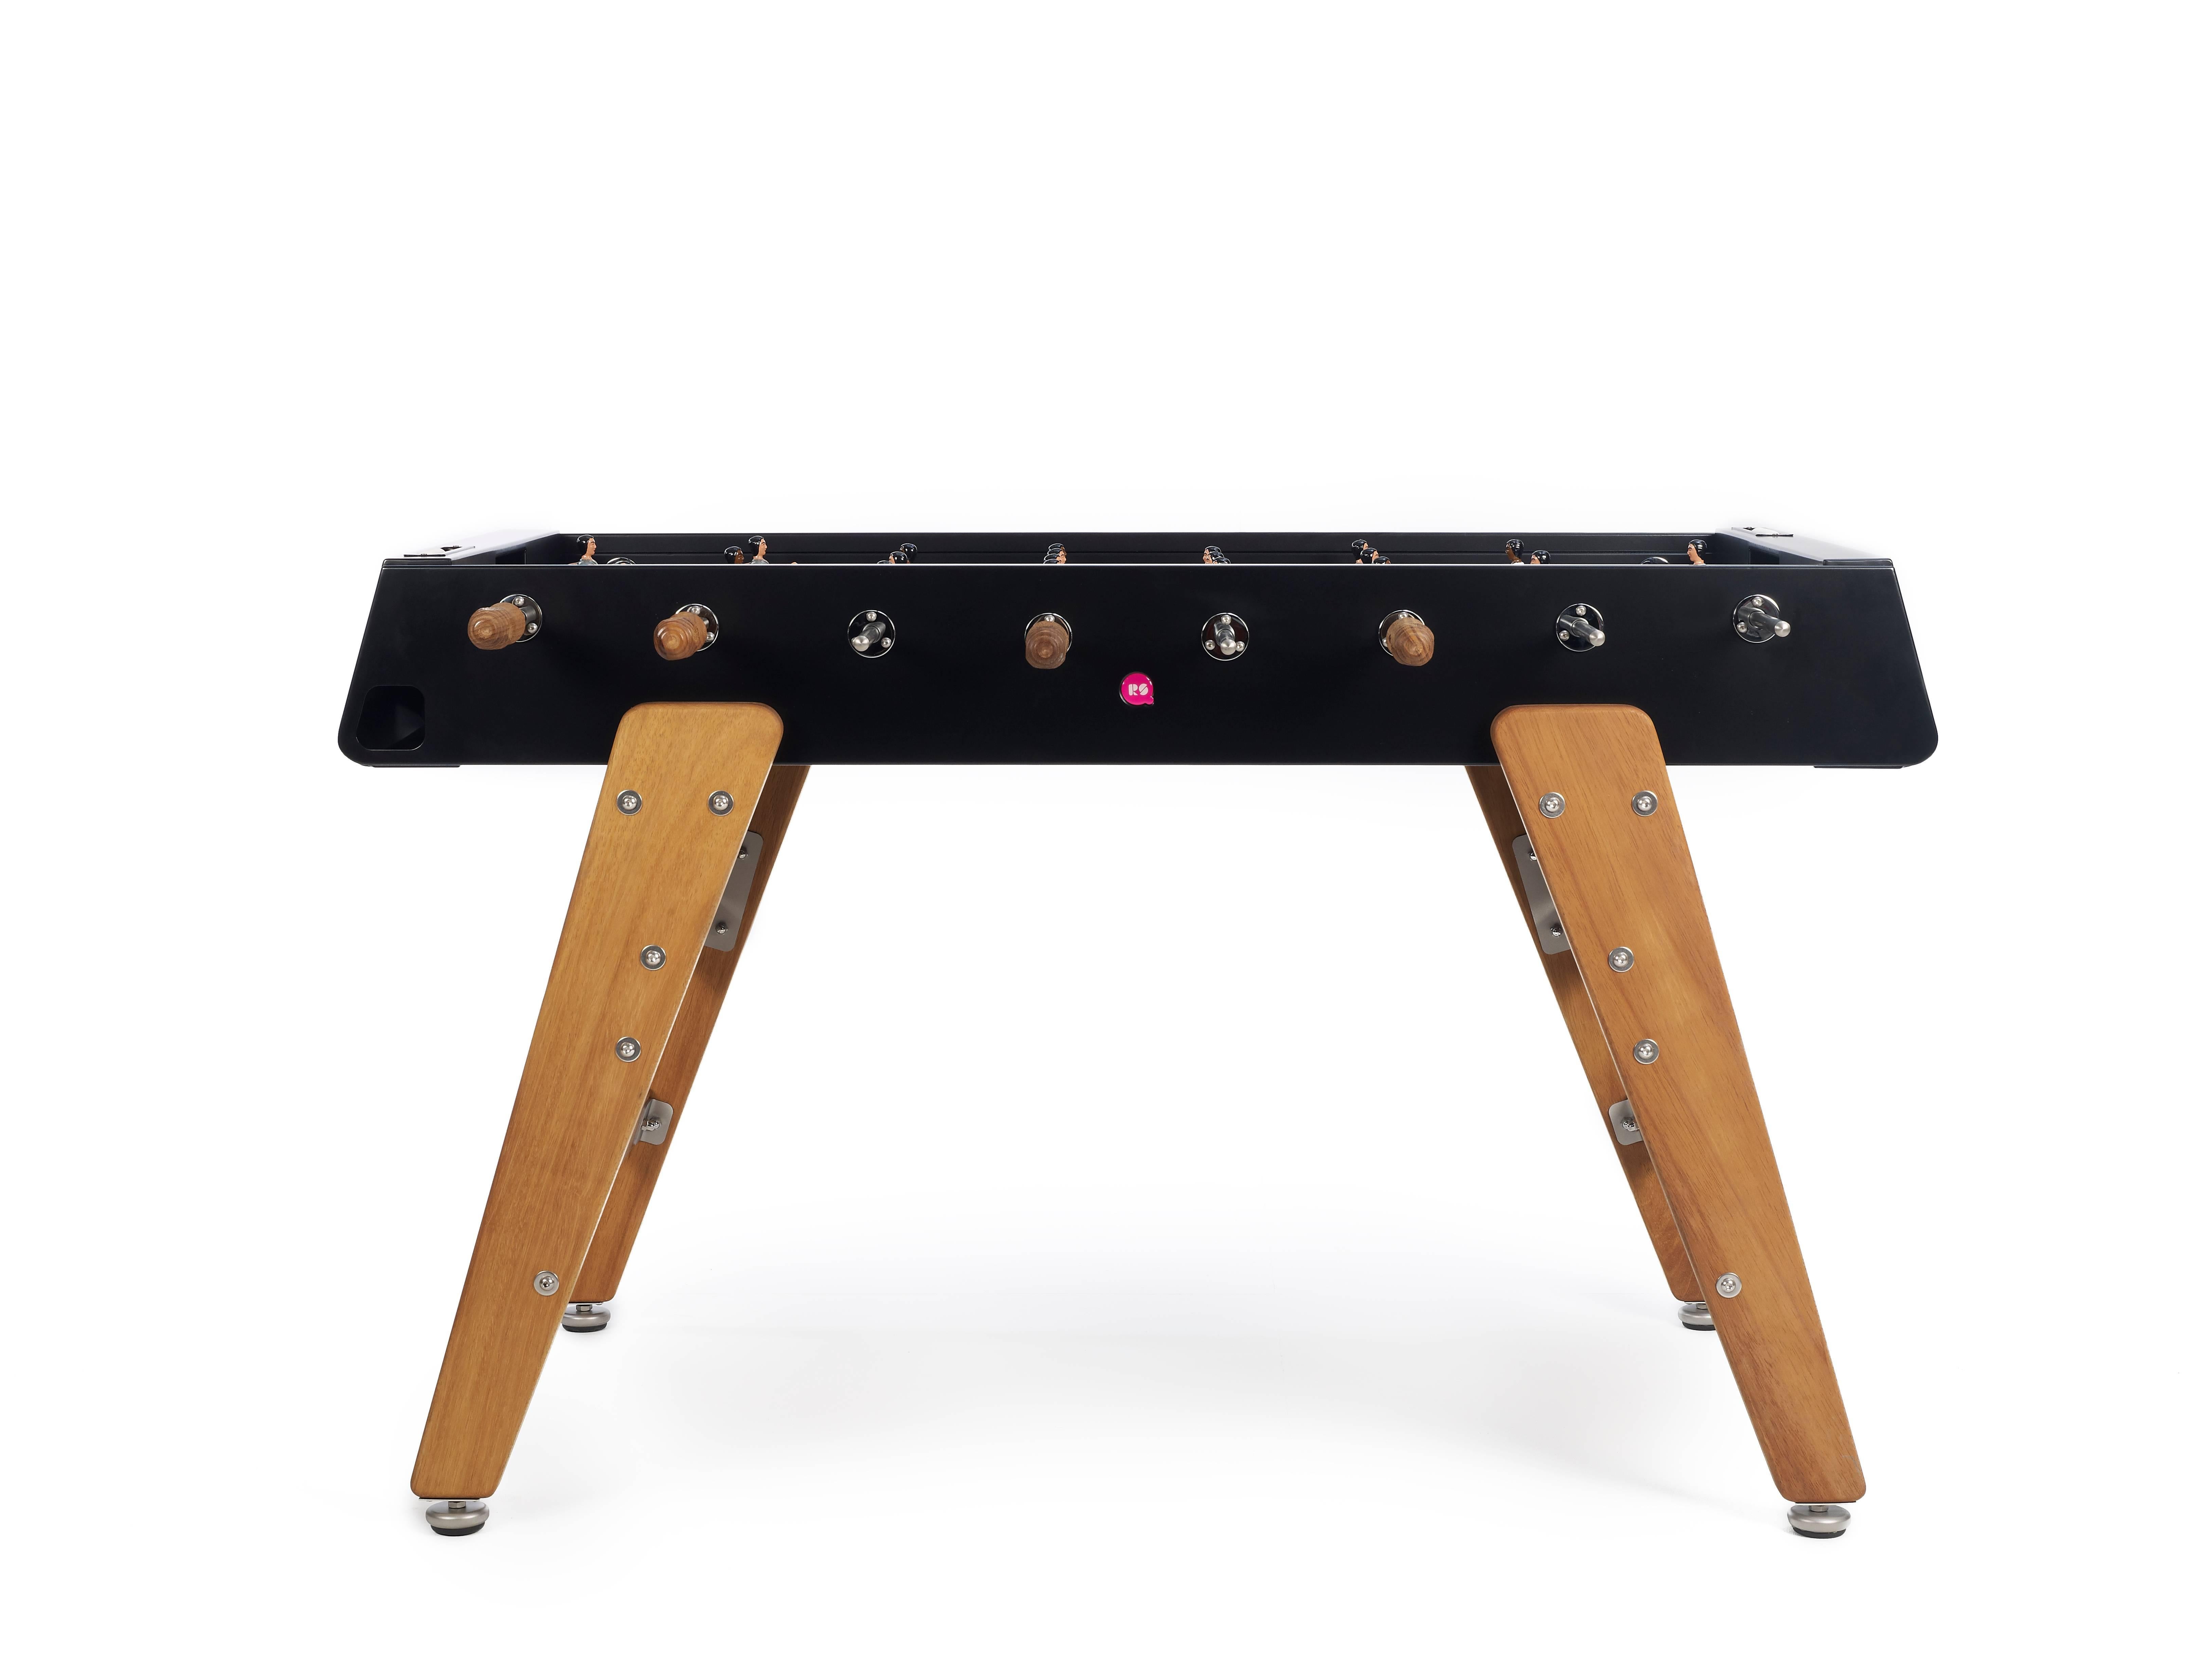 RS3 wood football table pits grey jerseys against white on a black field. Players are based on a vintage Spanish design with splayed legs which allows for better ball control and finesse. The table is made of steel with a cataphoresis process making